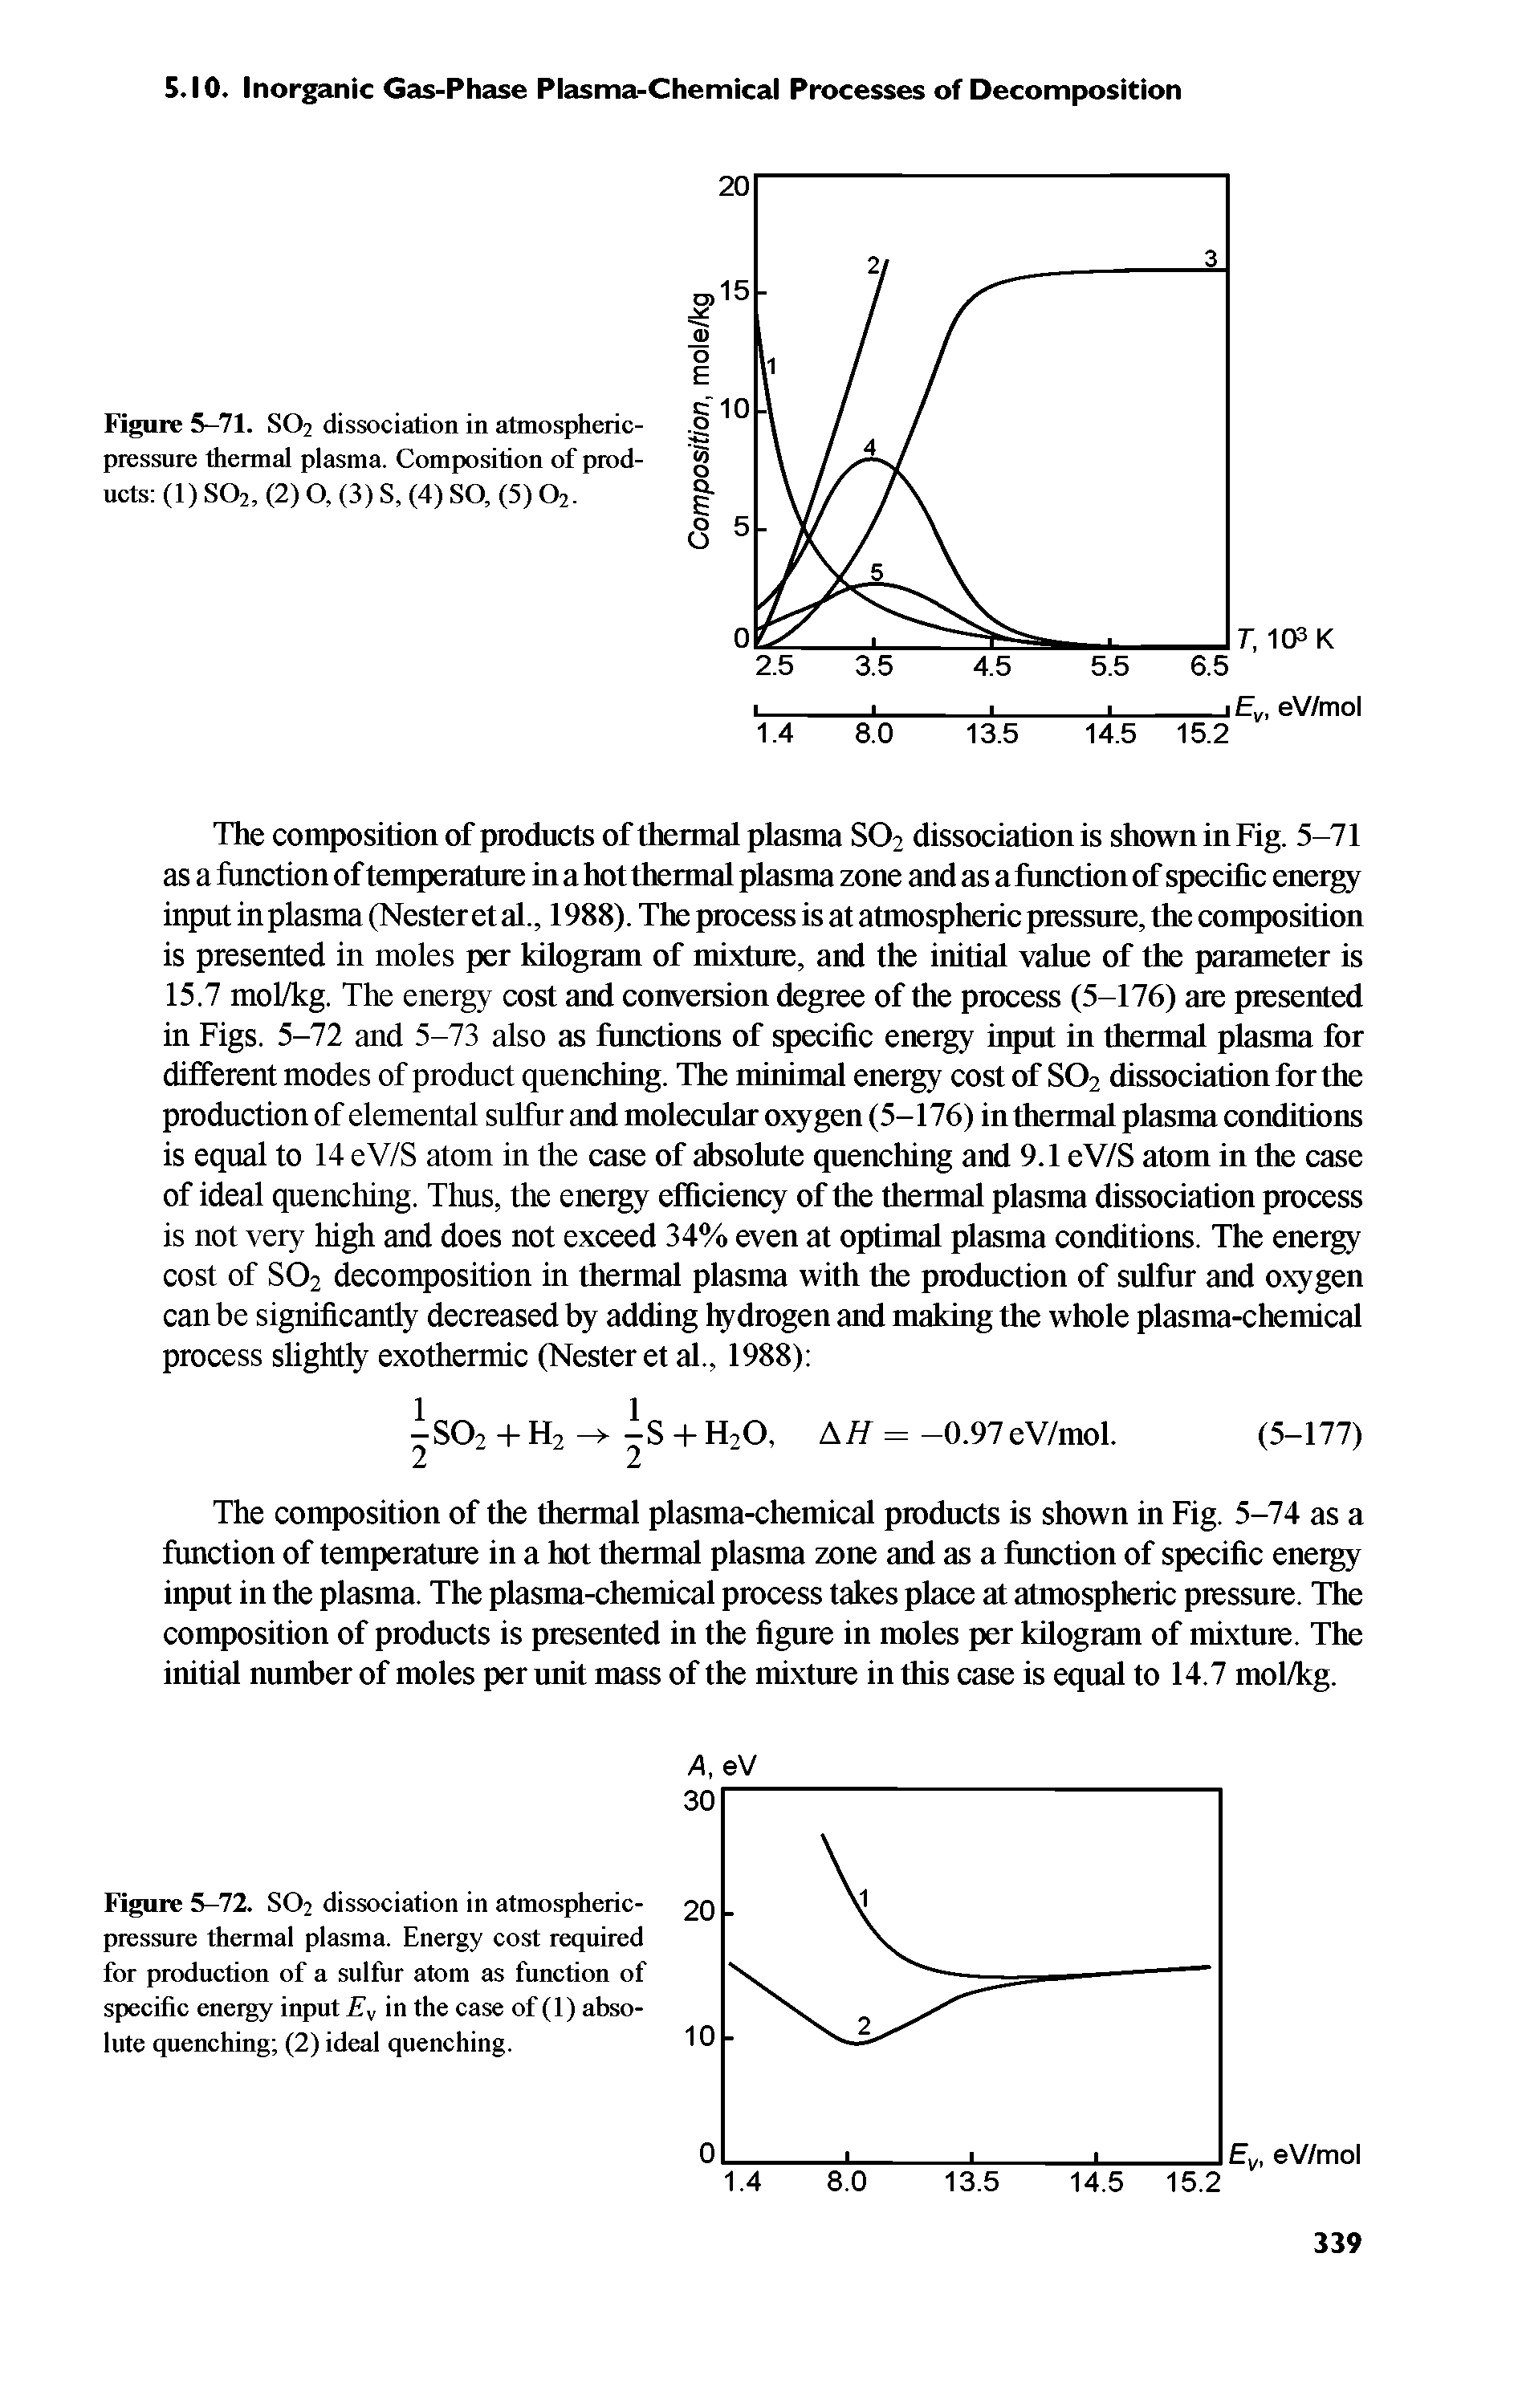 Figure 5-72. SO2 dissociation in atmospheric-pressure thermal plasma. Energy cost required for produetion of a sulfur atom as funetion of speeifie energy input in the case of (1) absolute quenehing (2) ideal quenching.